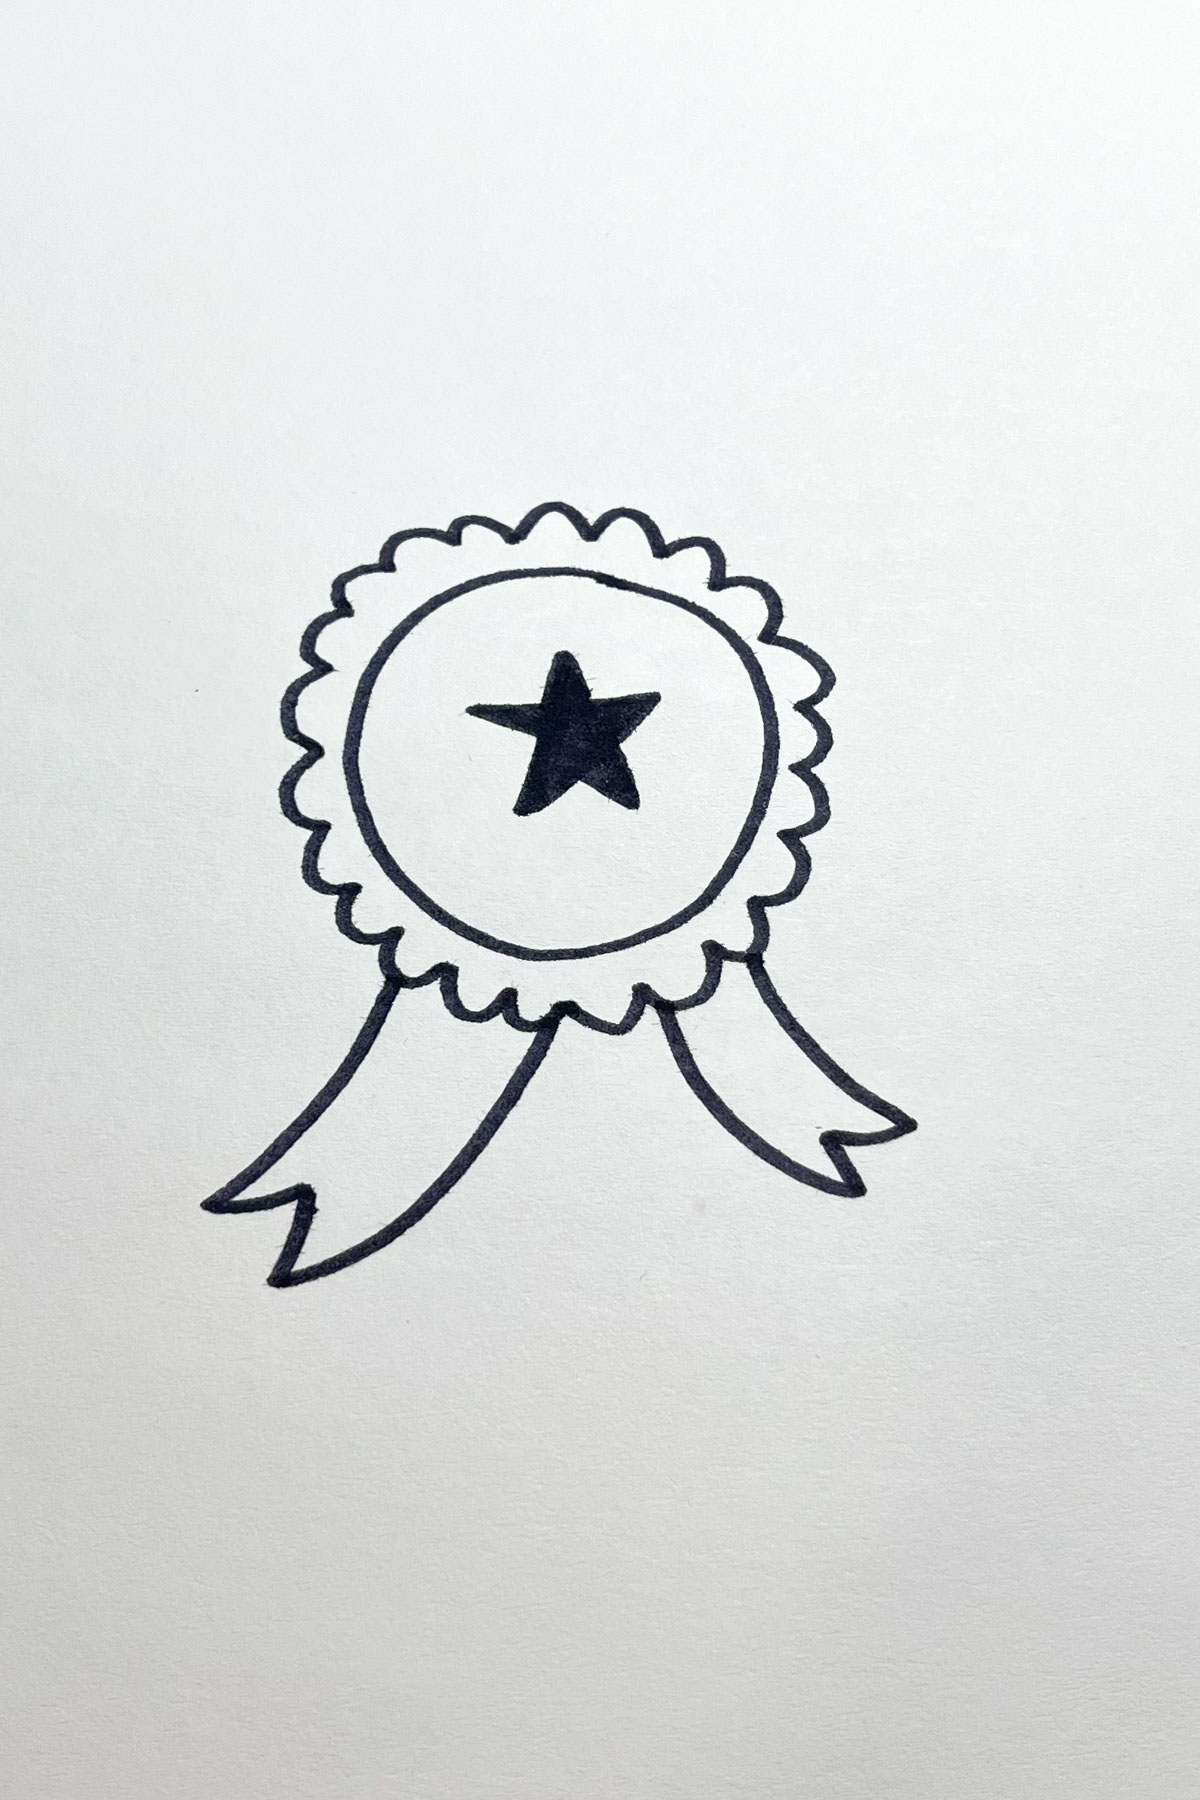 Gold star medal drawing